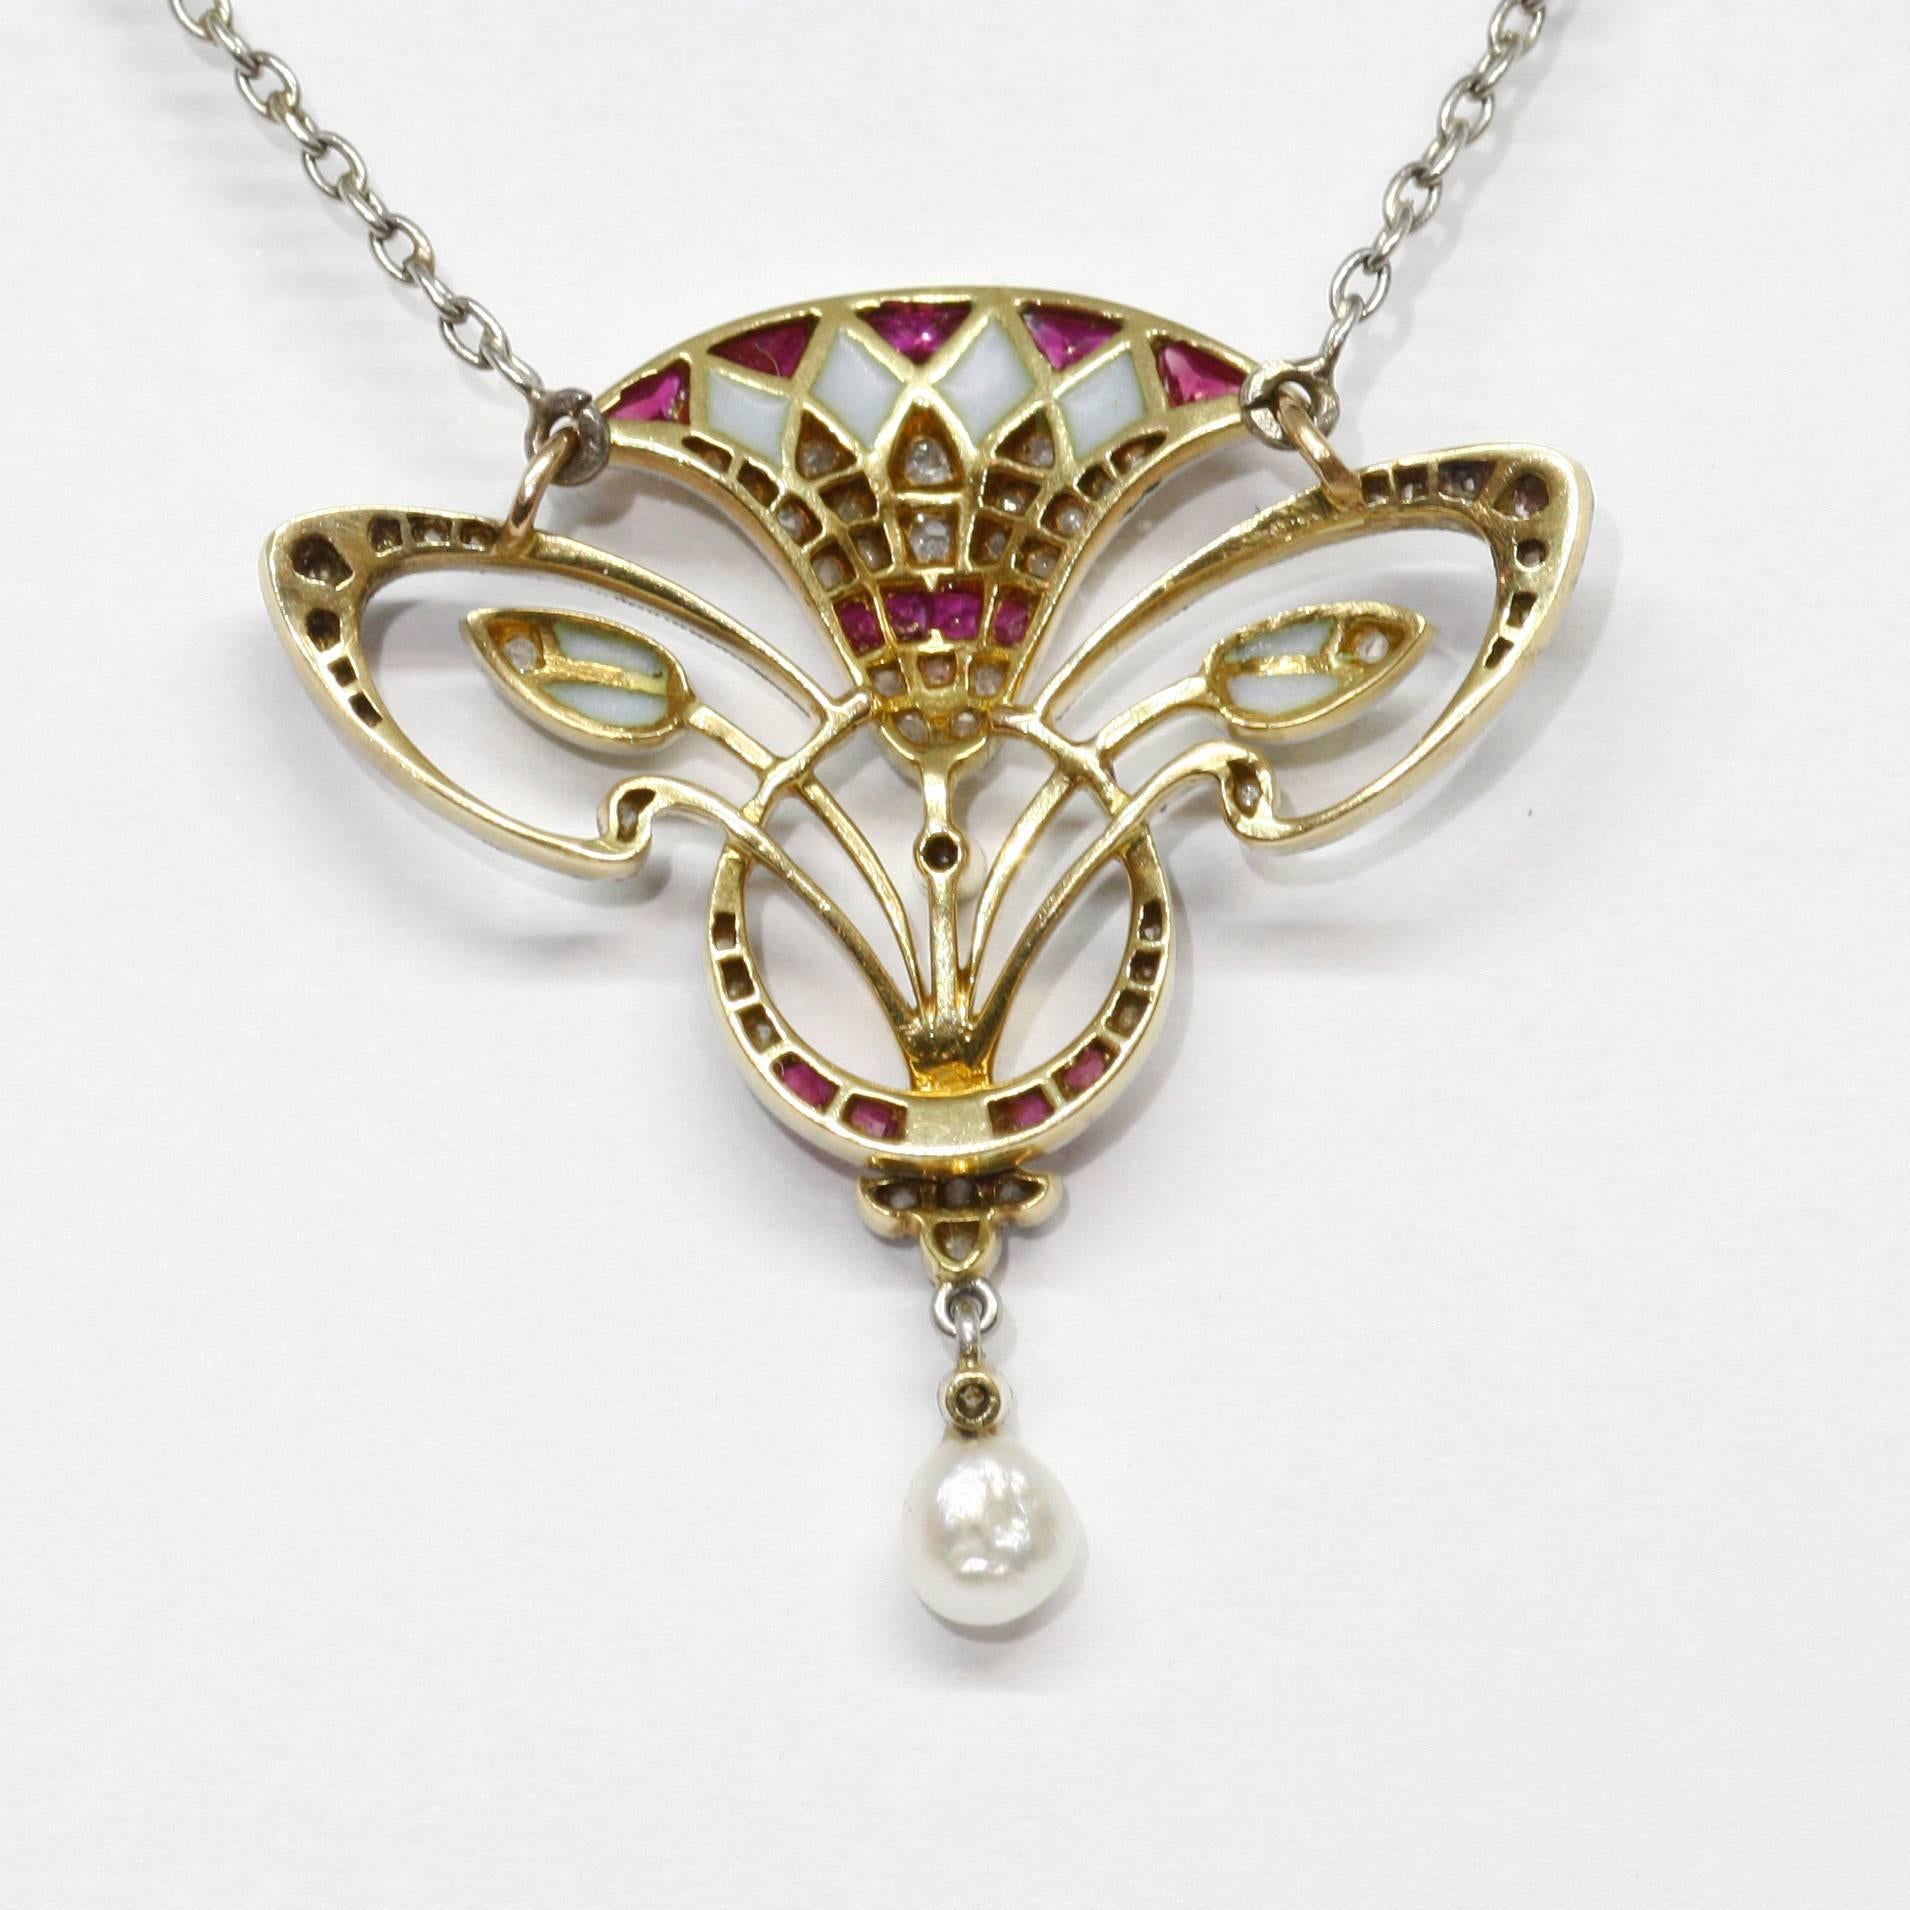 This beautiful french Belle Epoque pendant in the shape of a lotus flower testifies to the taste for Egyptian Antiquity during the first decades of the 20th century. It is set in 18k yellow gold and platinum with diamonds and calibré-cut rubies